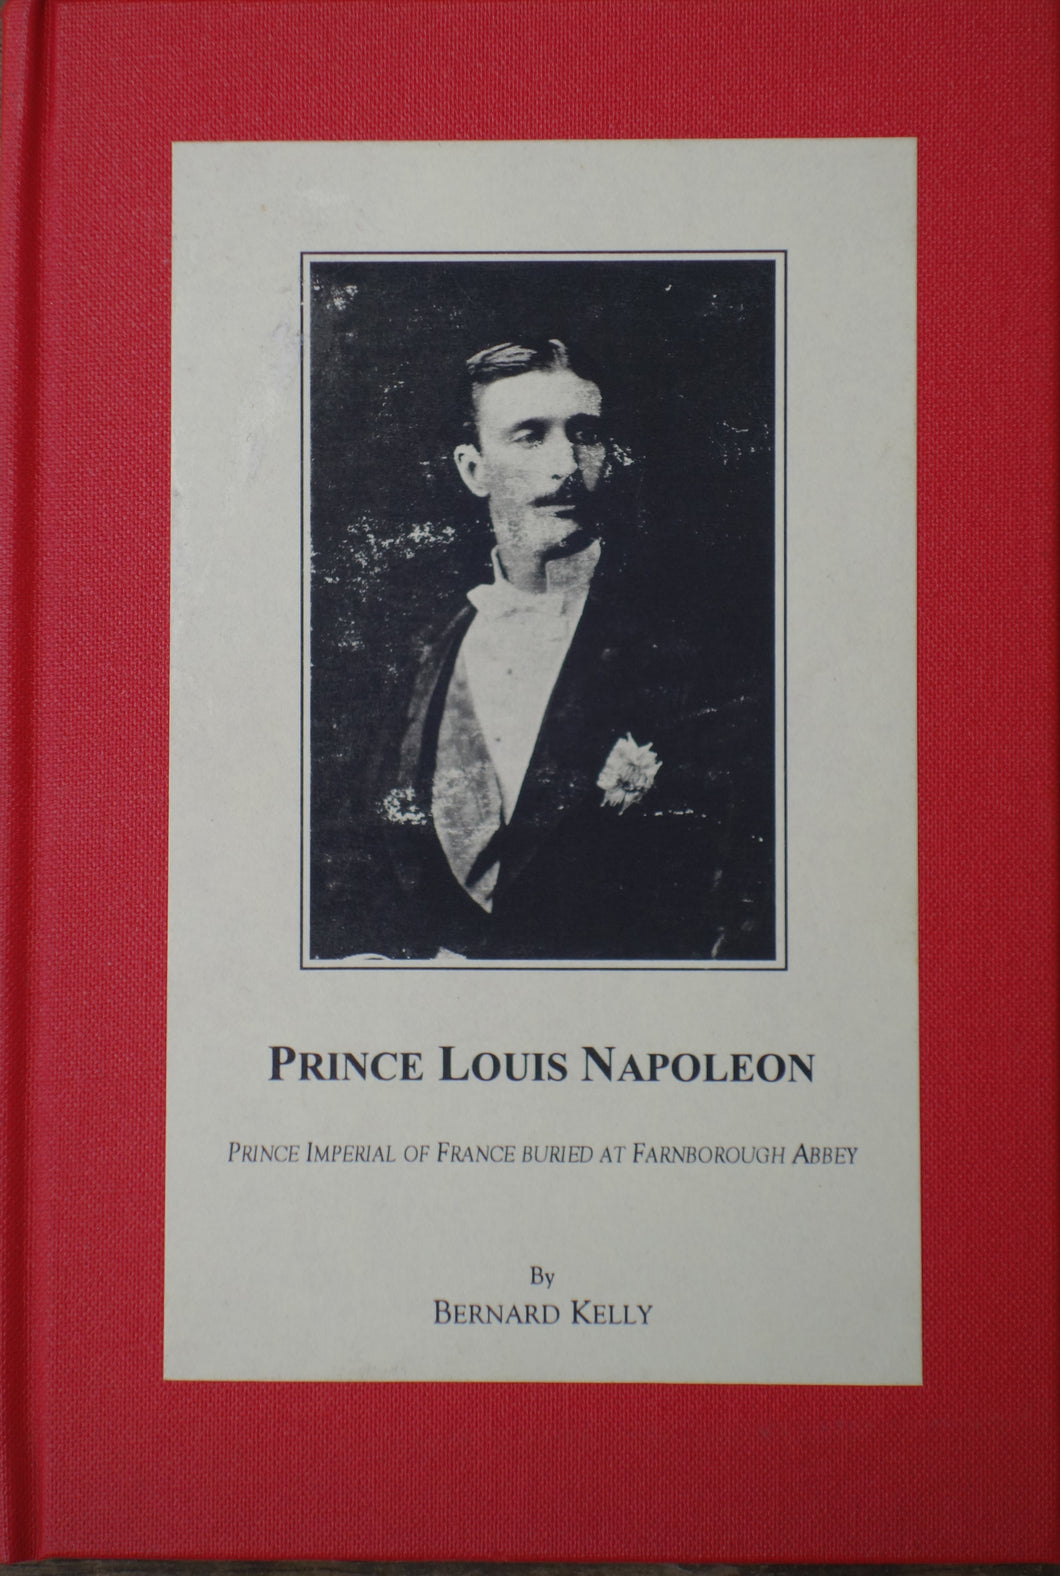 'PRINCE LOUIS NAPOLEON; Prince Imperial of France Buried at Farnborough Abbey' by Bernard Kelly